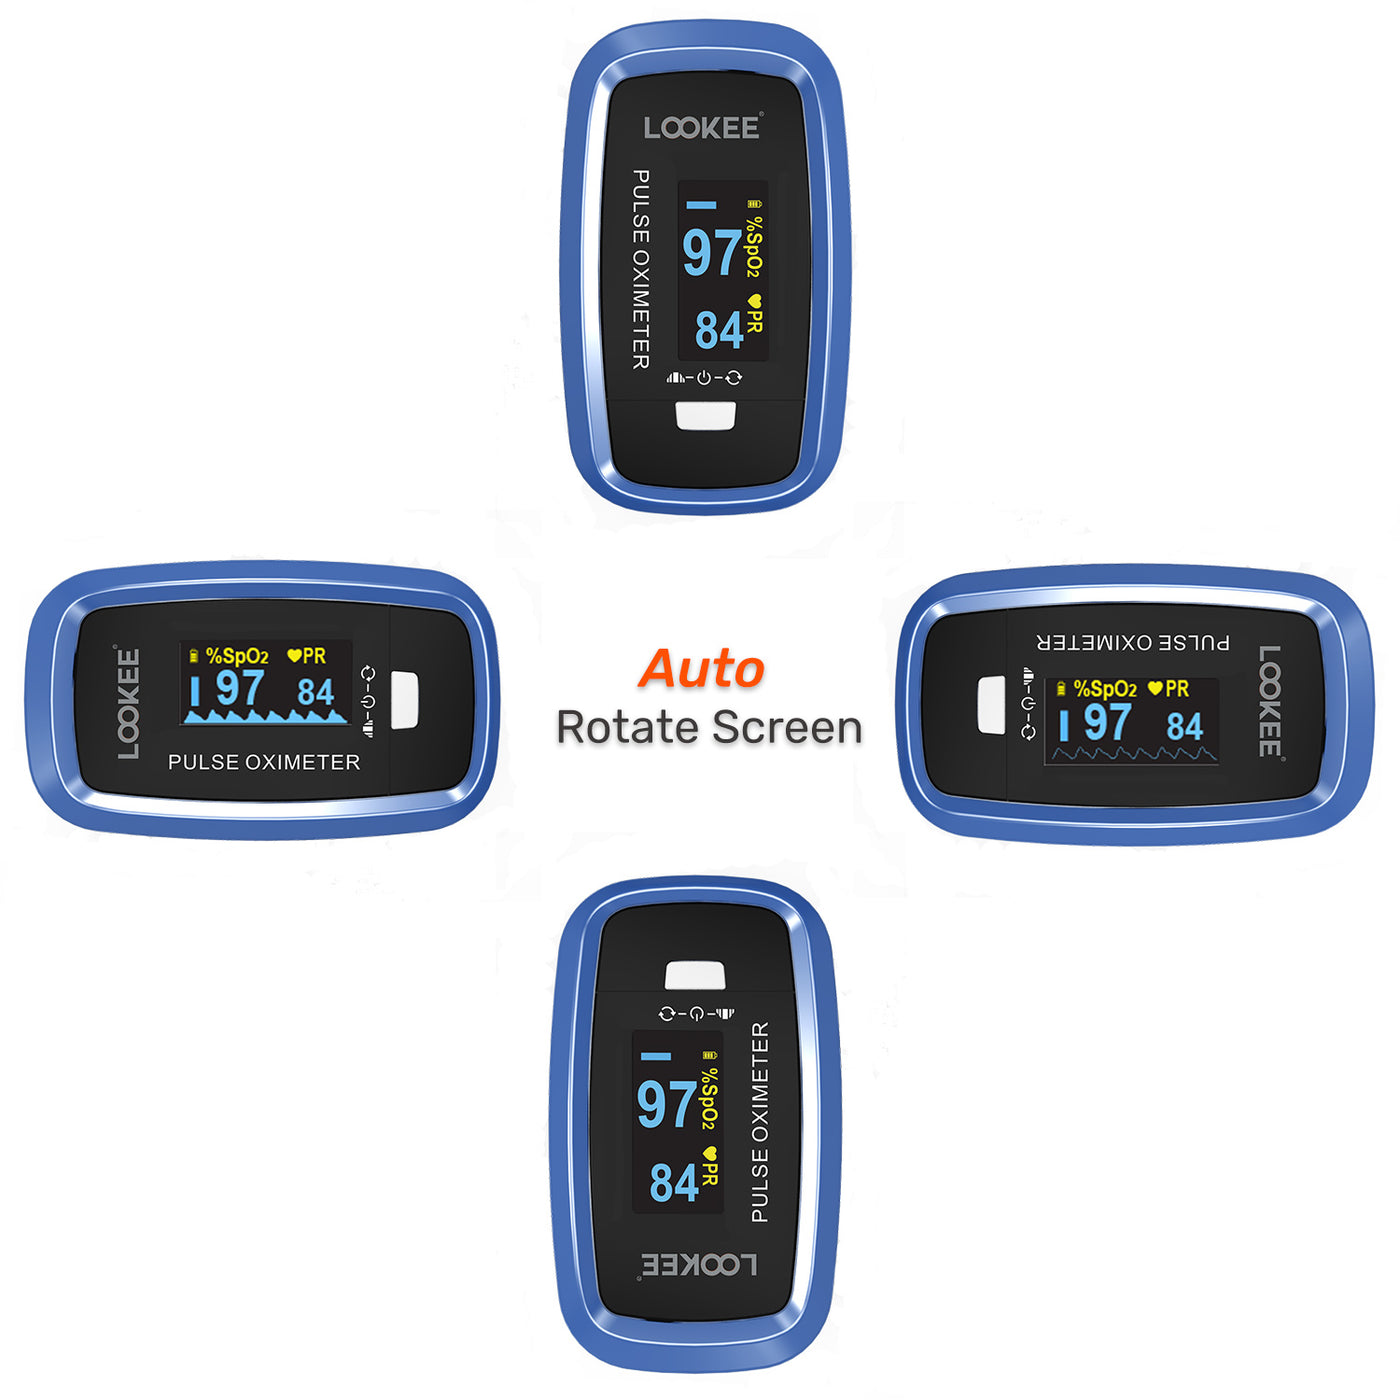 LOOKEE® LK50D1A Deluxe Finger Pulse Oximeter | Blood Oxygen Saturation Monitor with Auto-Rotate Screen | Available in Canada Only